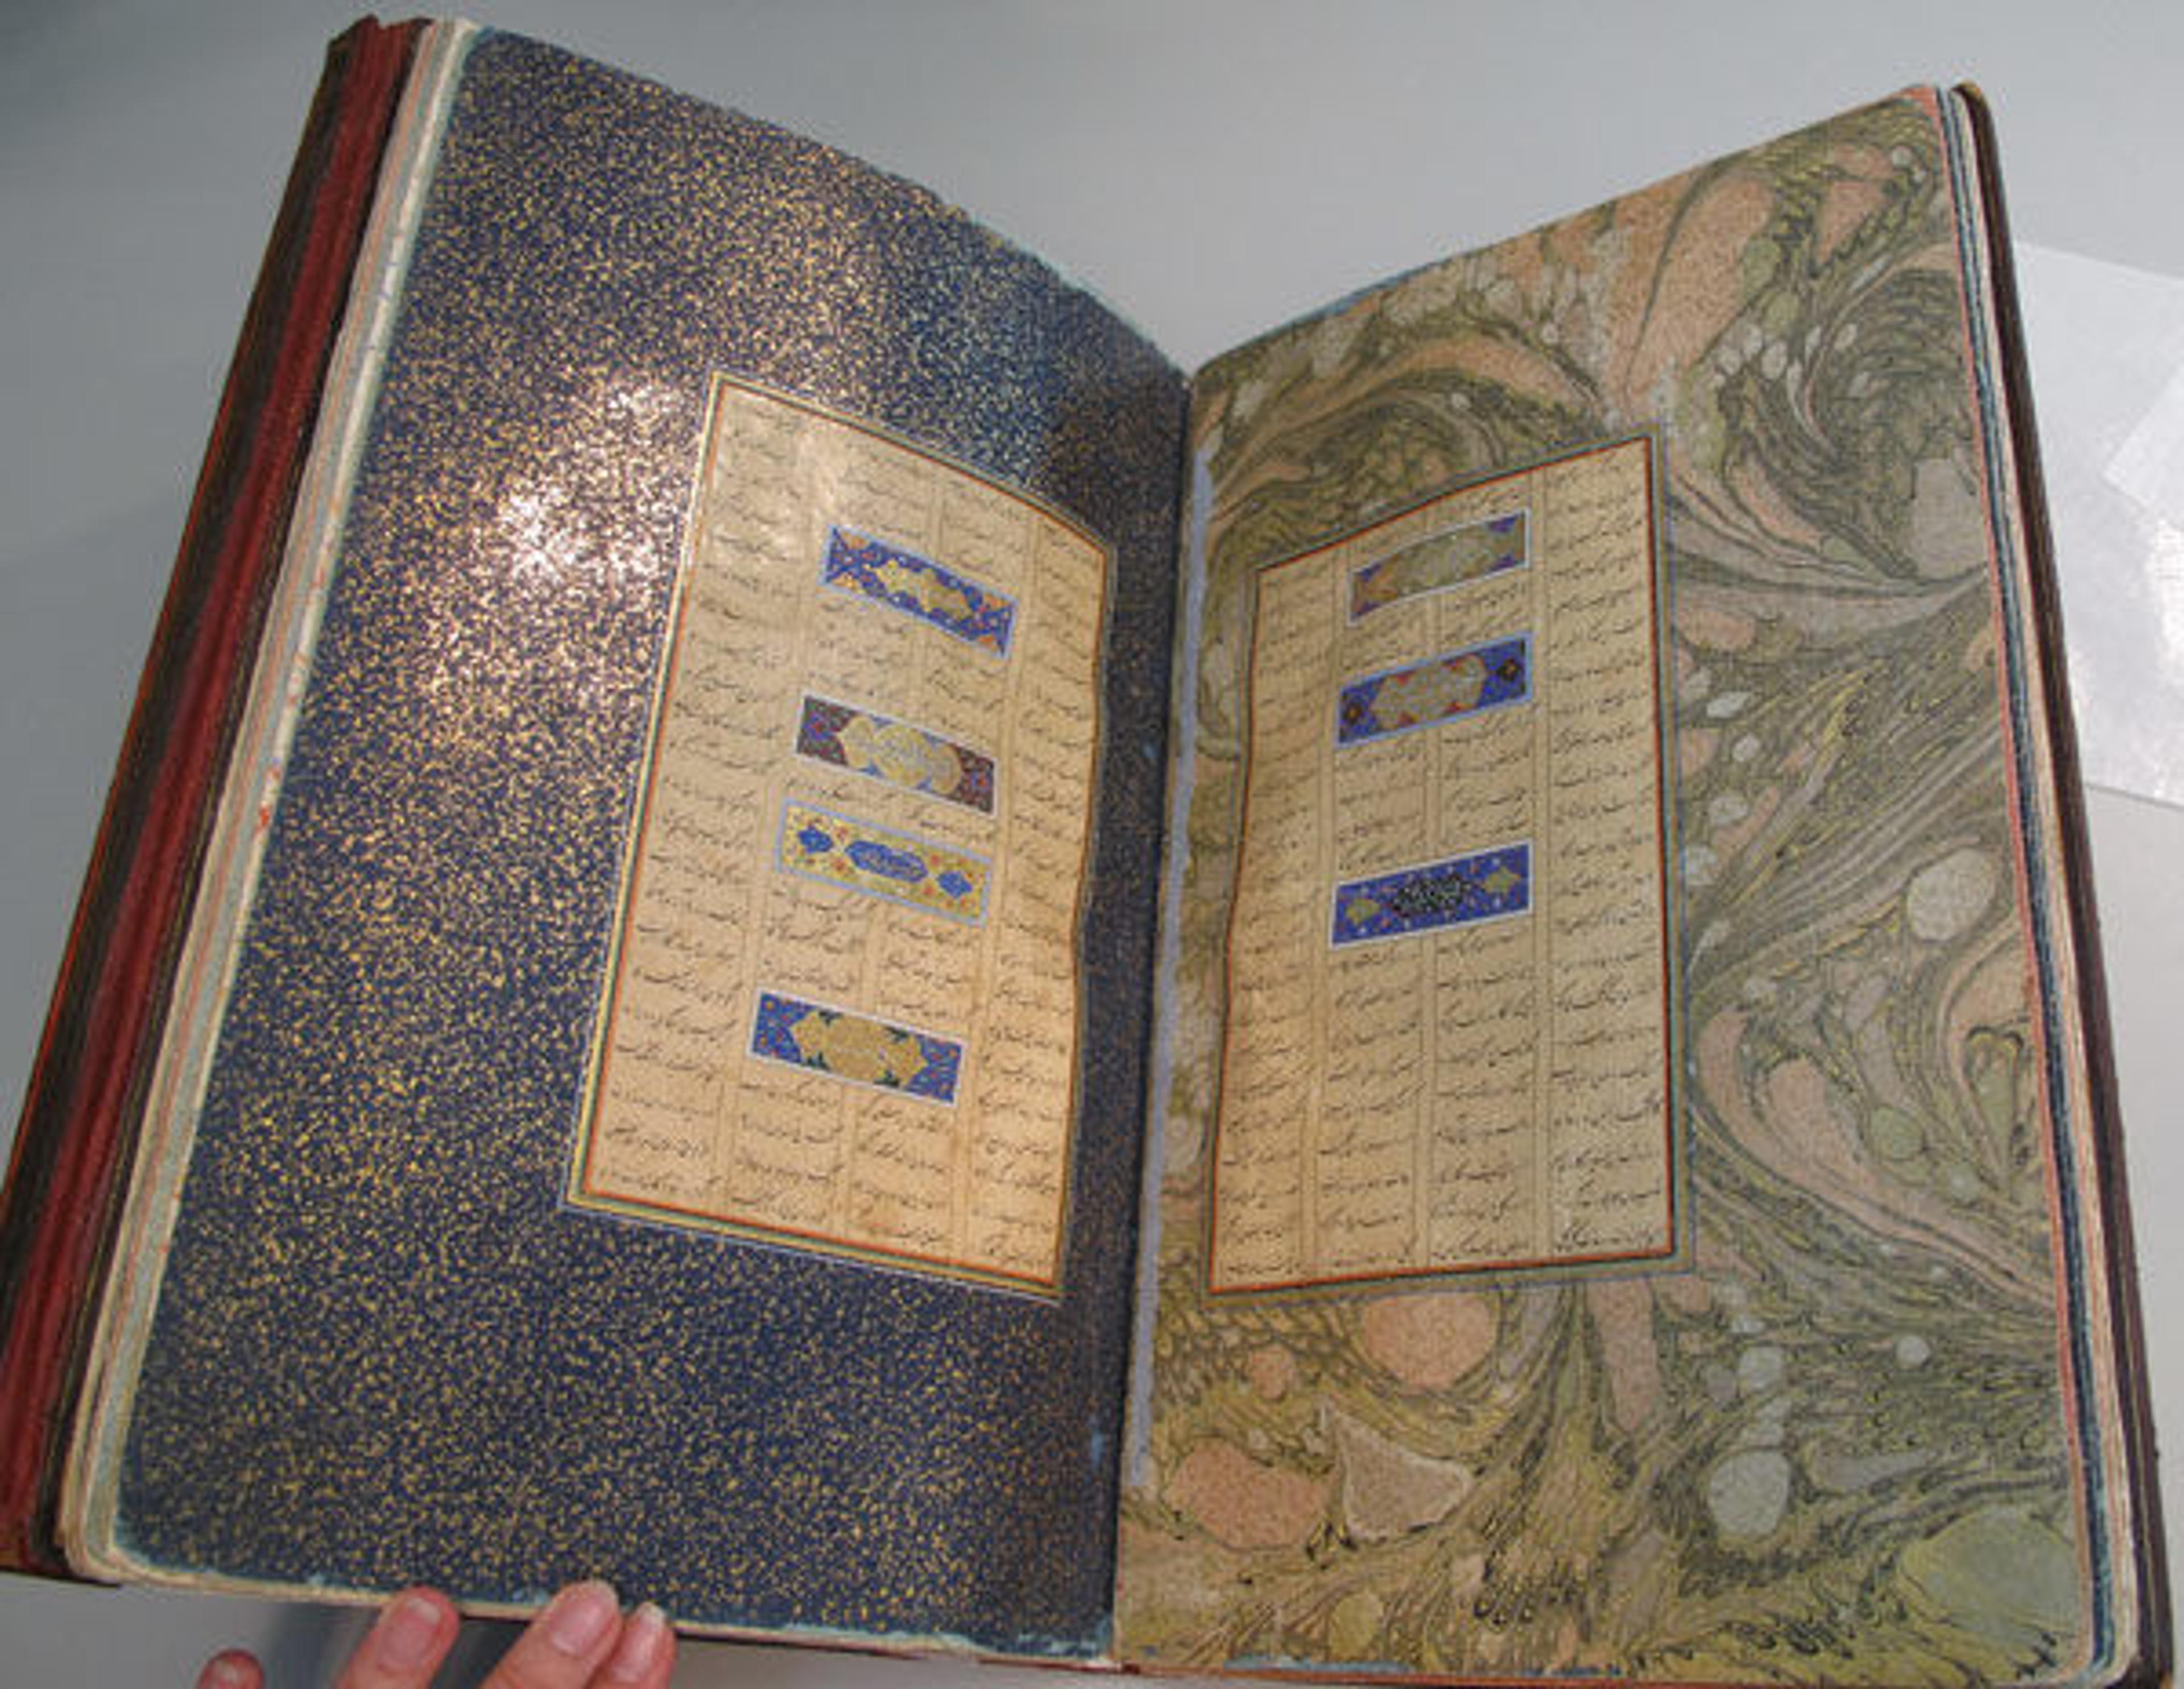 Selected works on marbled paper are available for full exploration on our touch-screen display in galleries 455–456, or in the Kevorkian Study Center touch screens in gallery 458. Author: Farid al-Din 'Attar (ca. 1142–1220). Binding for the Mantiq al-tayr (Language of the Birds), ca. 1600. Iran, Isfahan. Islamic. Leather, gold, and color; carved, impressed, and gilded. The Metropolitan Museum of Art, New York, Fletcher Fund, 1963 (63.210.67)